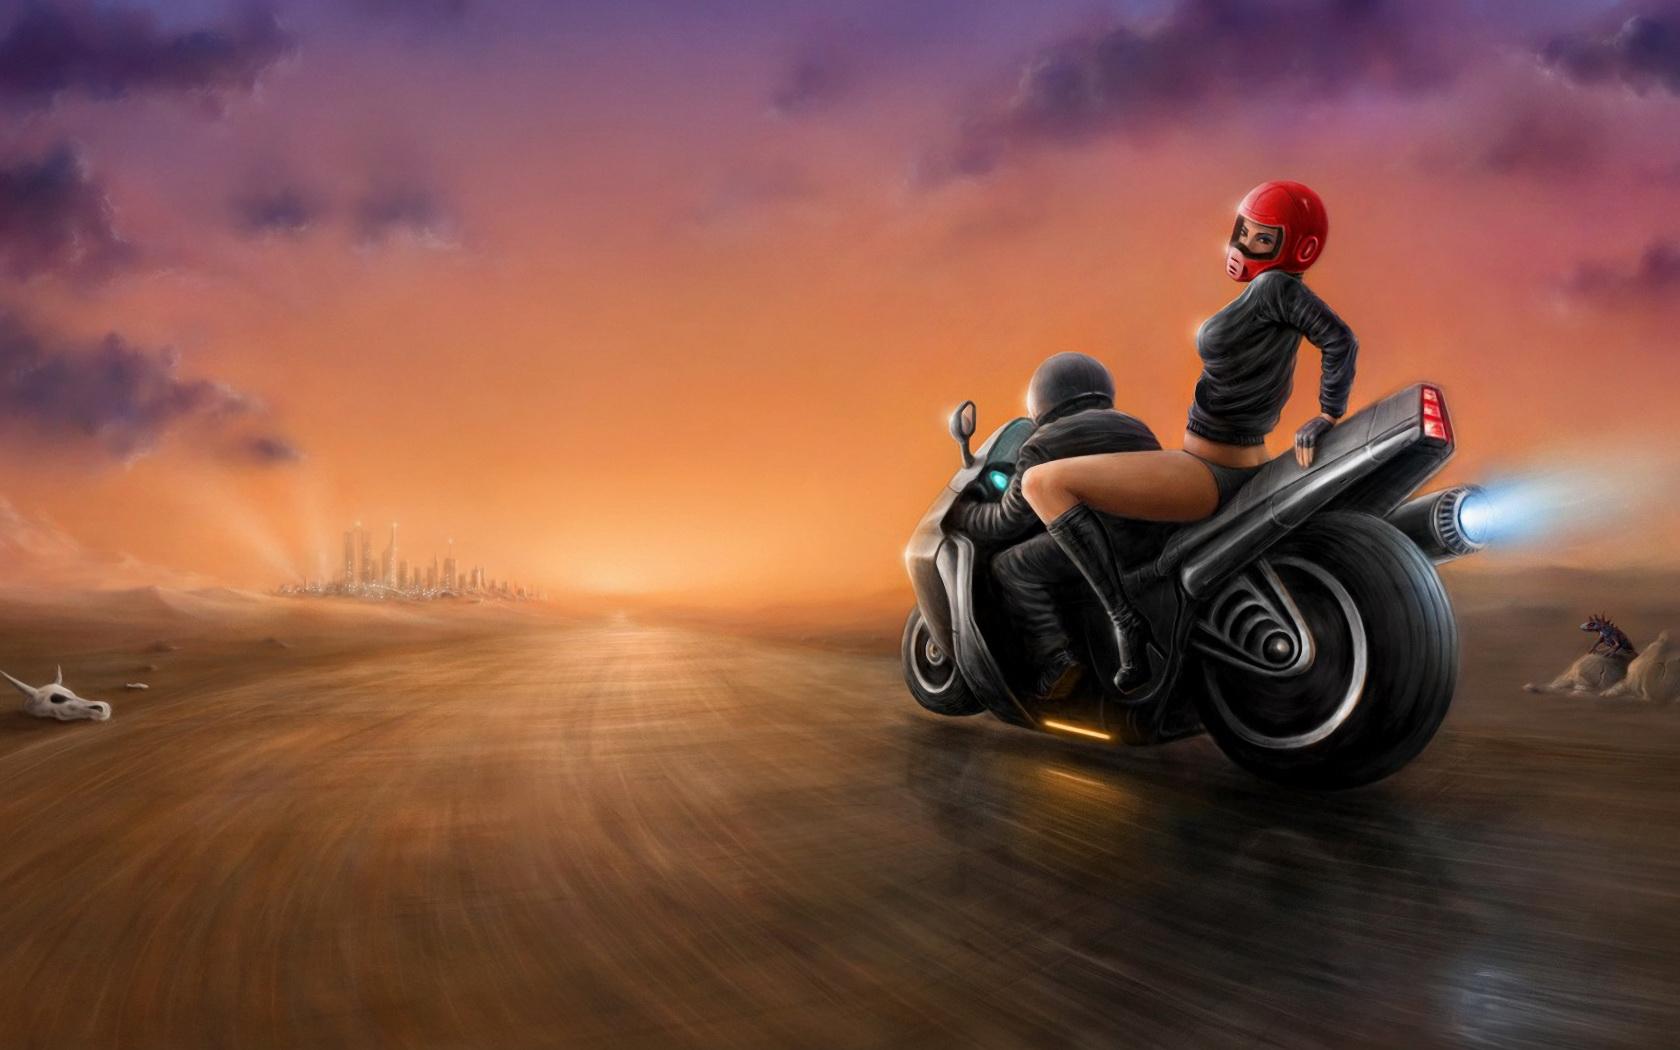 Artistic Motorcycle HD Wallpapers and Backgrounds